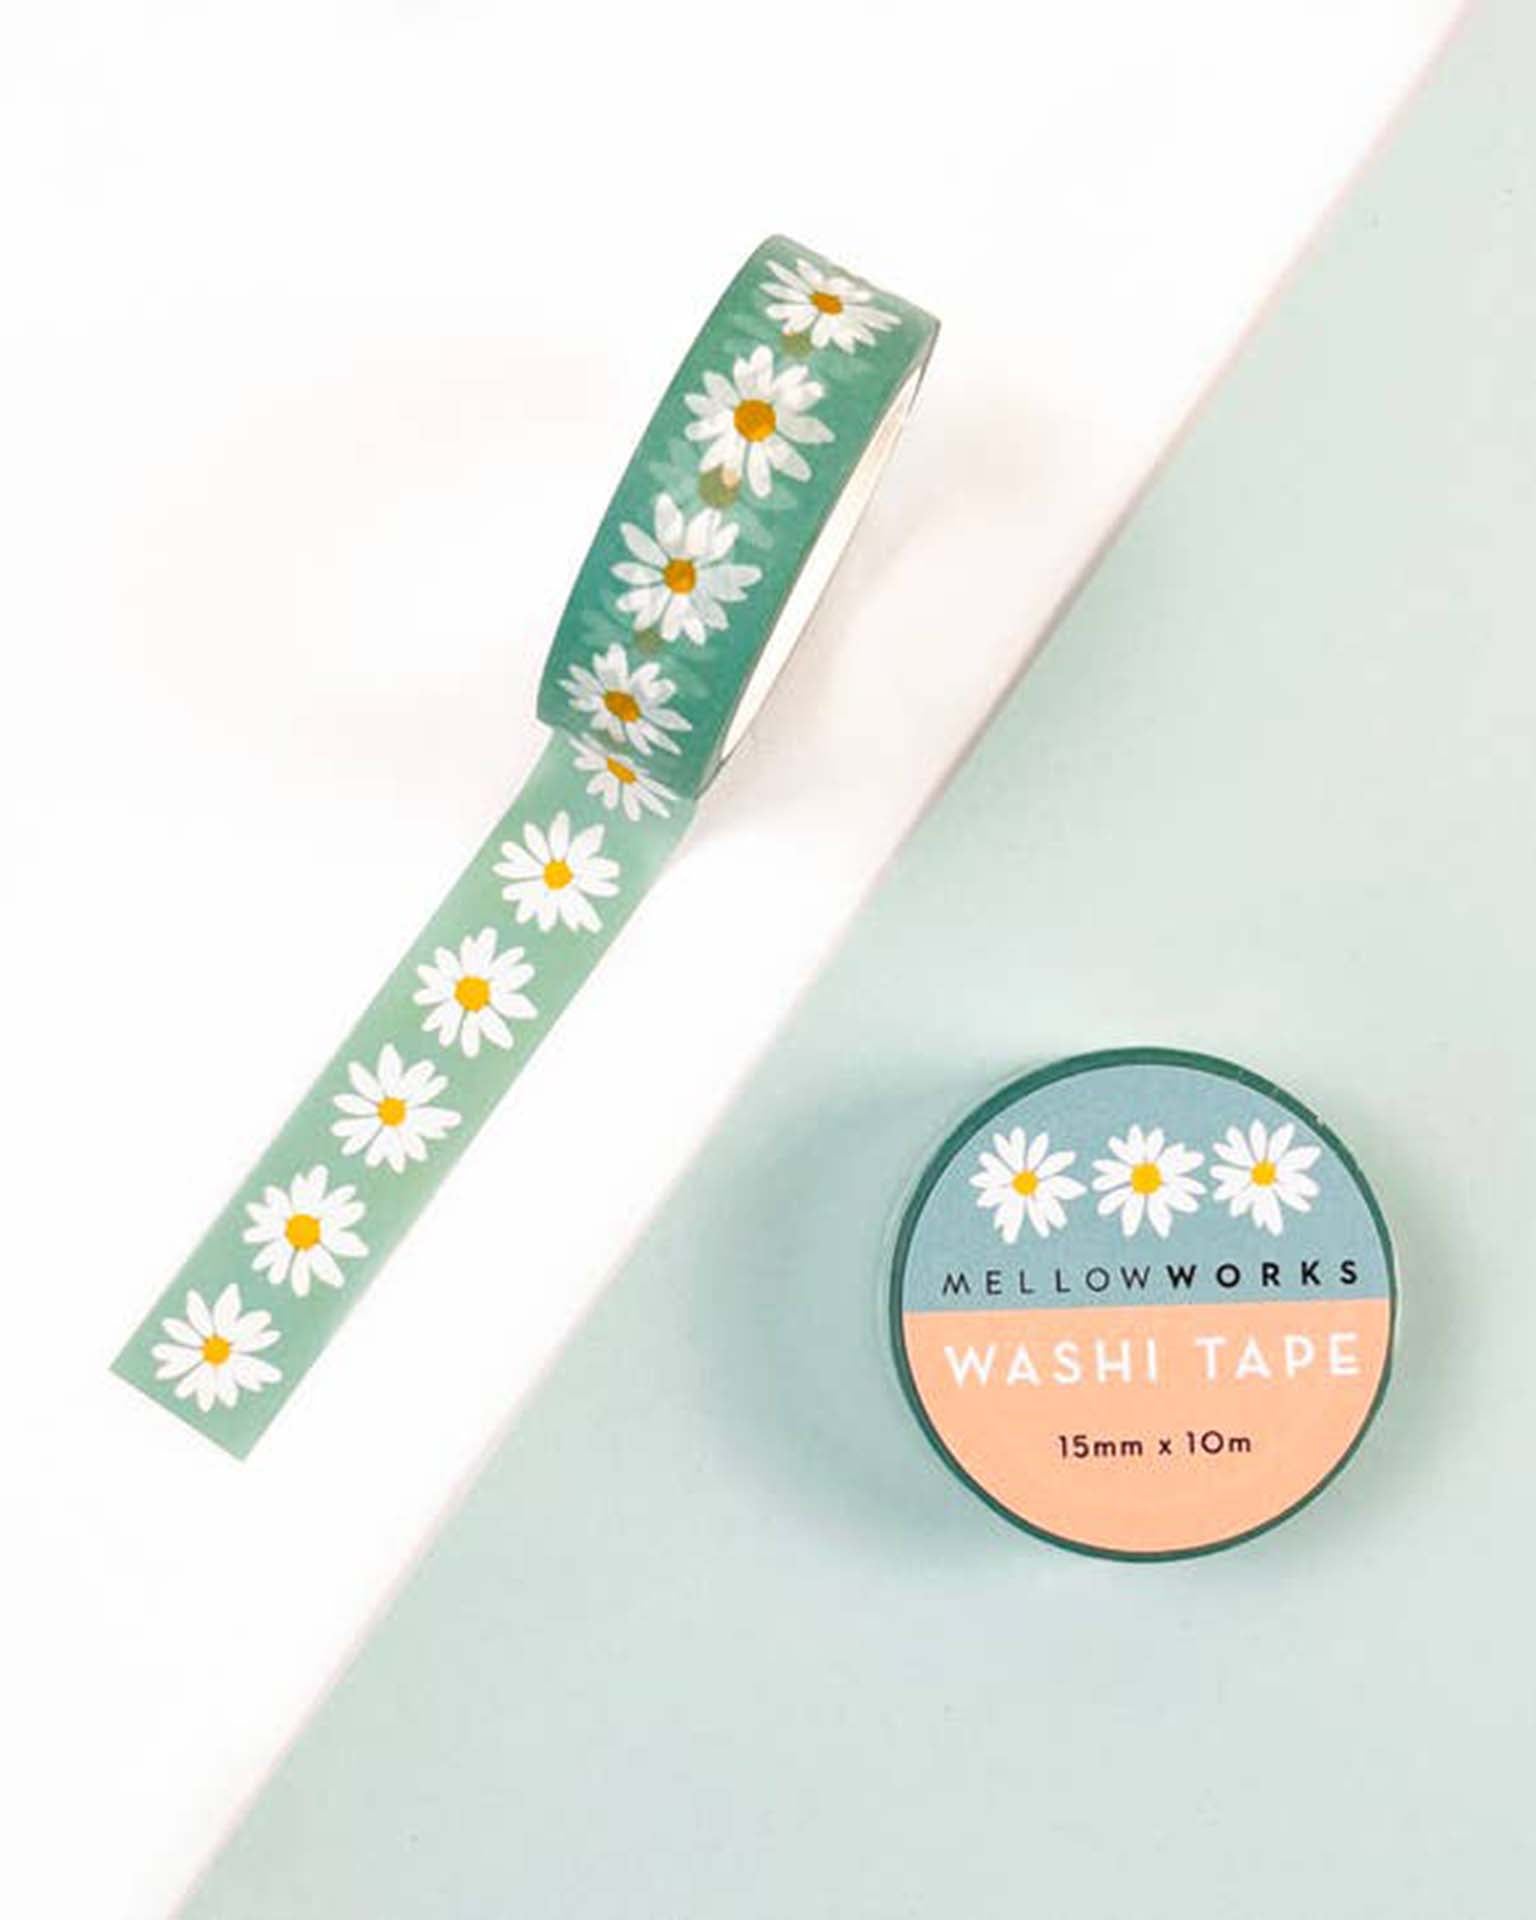 Little mellowworks Party spring daisies washi tape